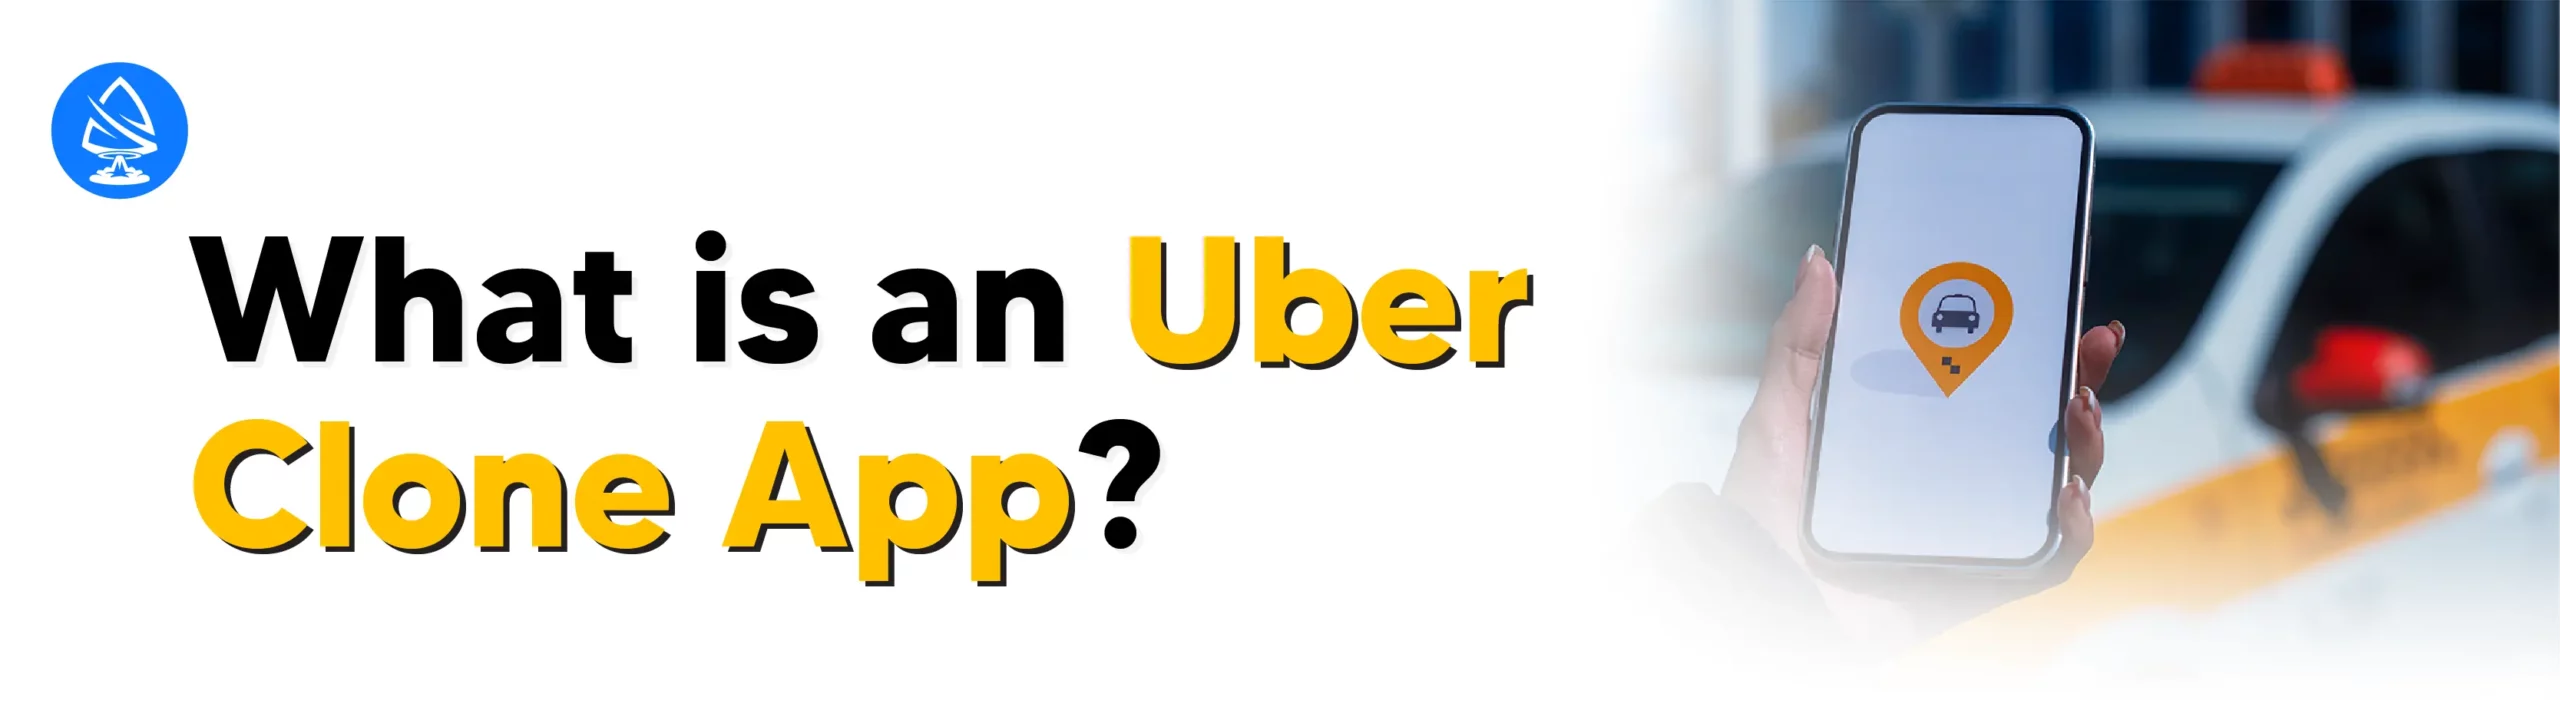 What is an Uber Clone App